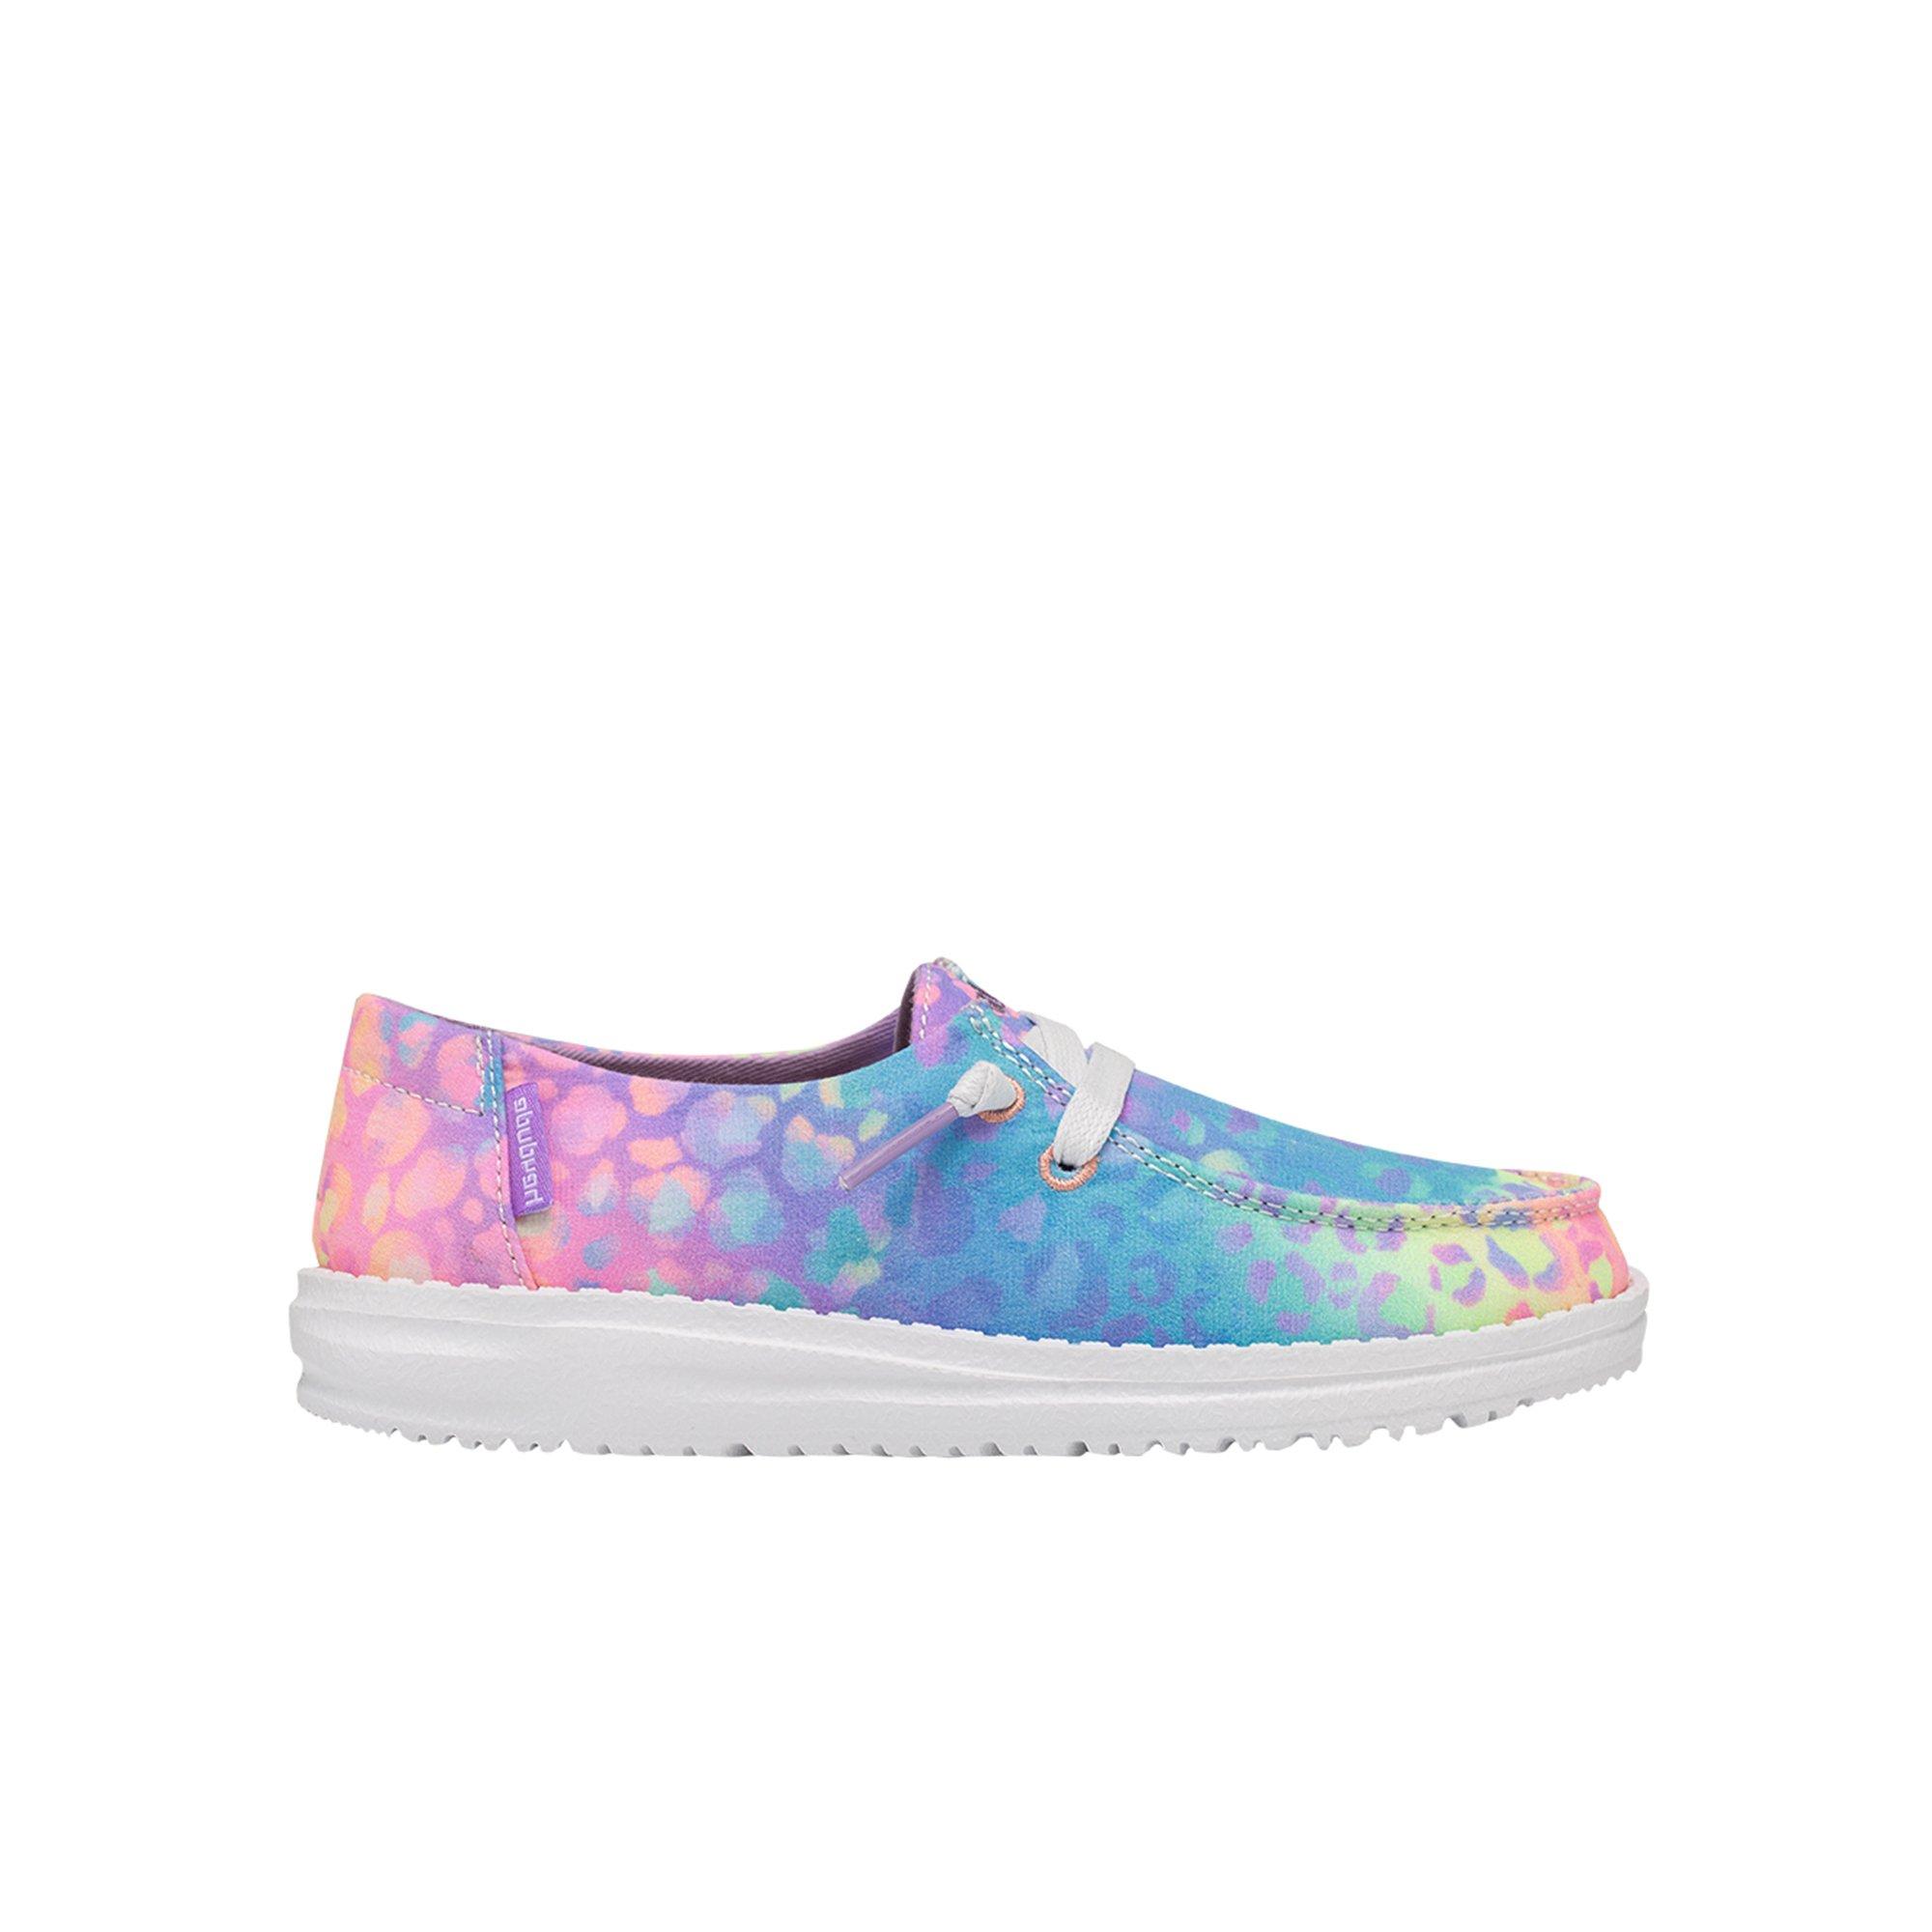 Wendy Leo Nut Youth Girl's Shoes by Hey Dude